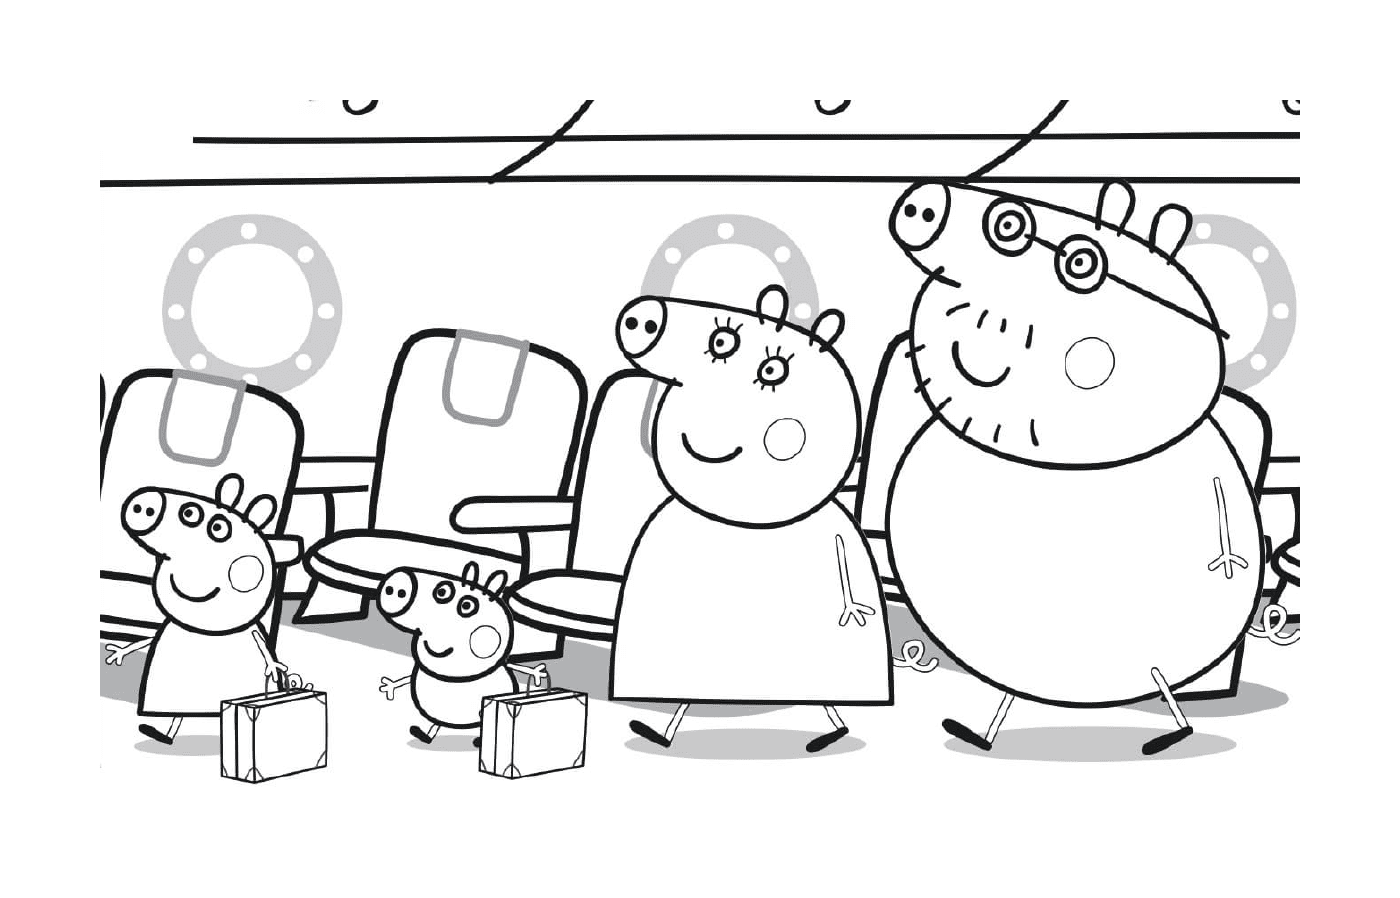  Peppa Pig and his family headed for their seats on the plane 